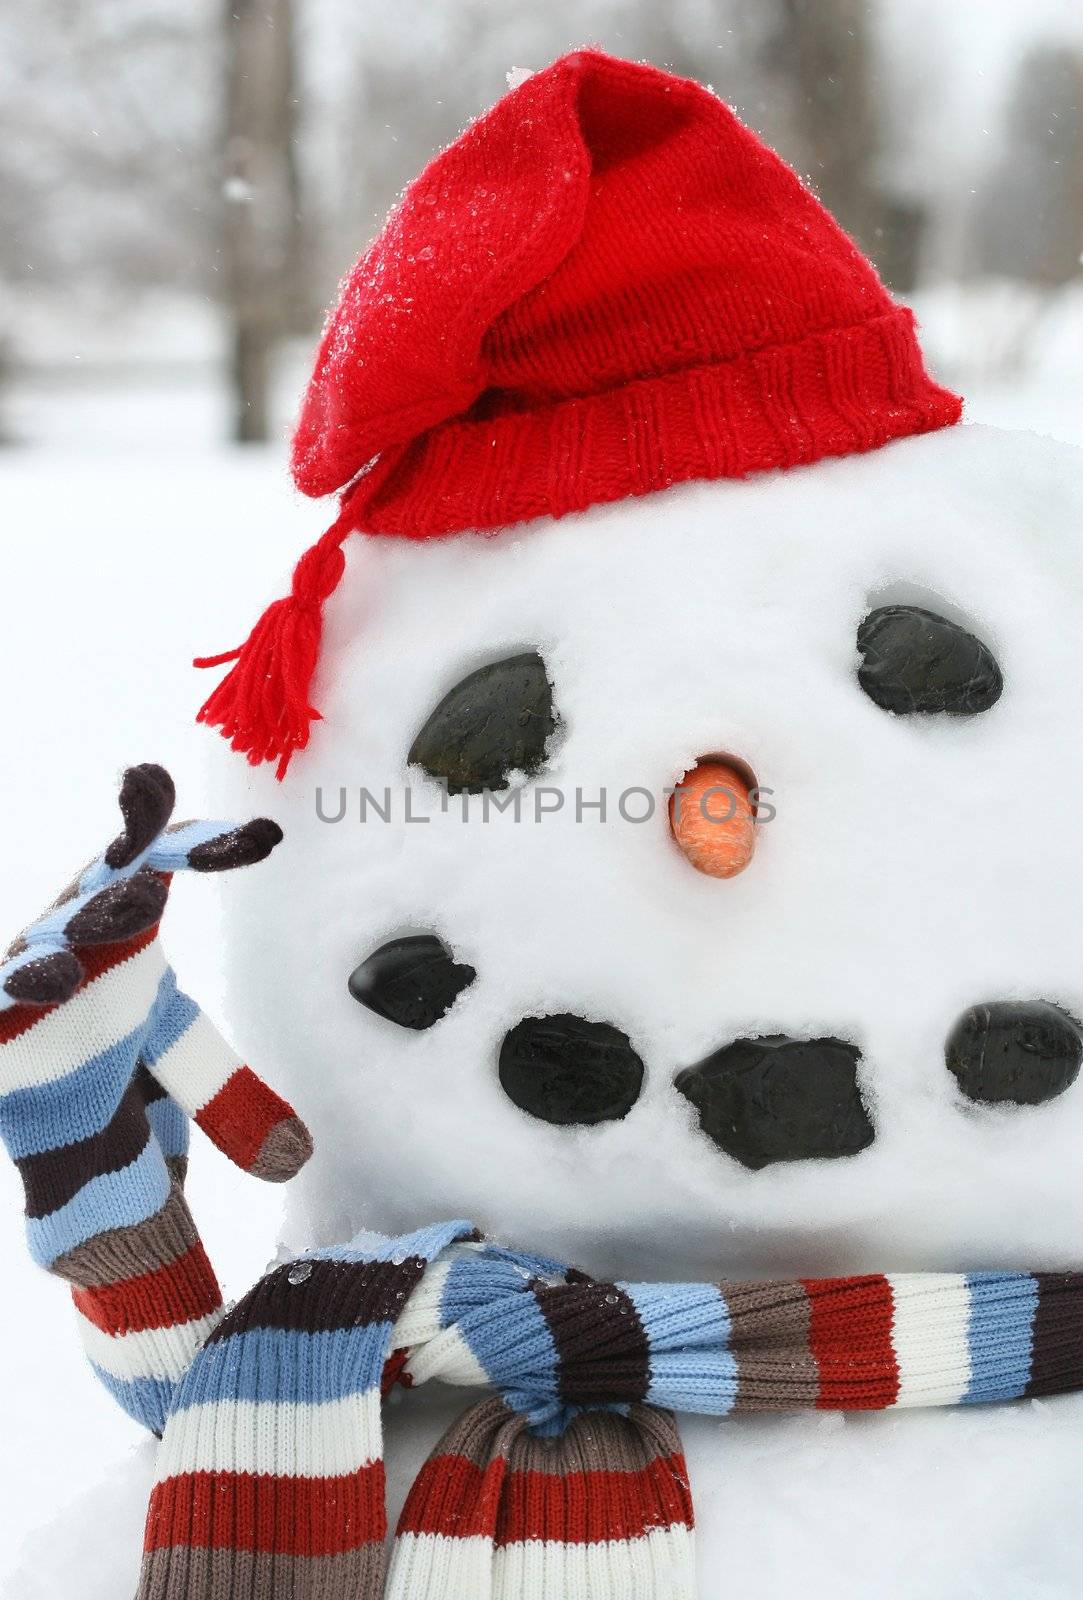 Smiley face snowman with a red hat